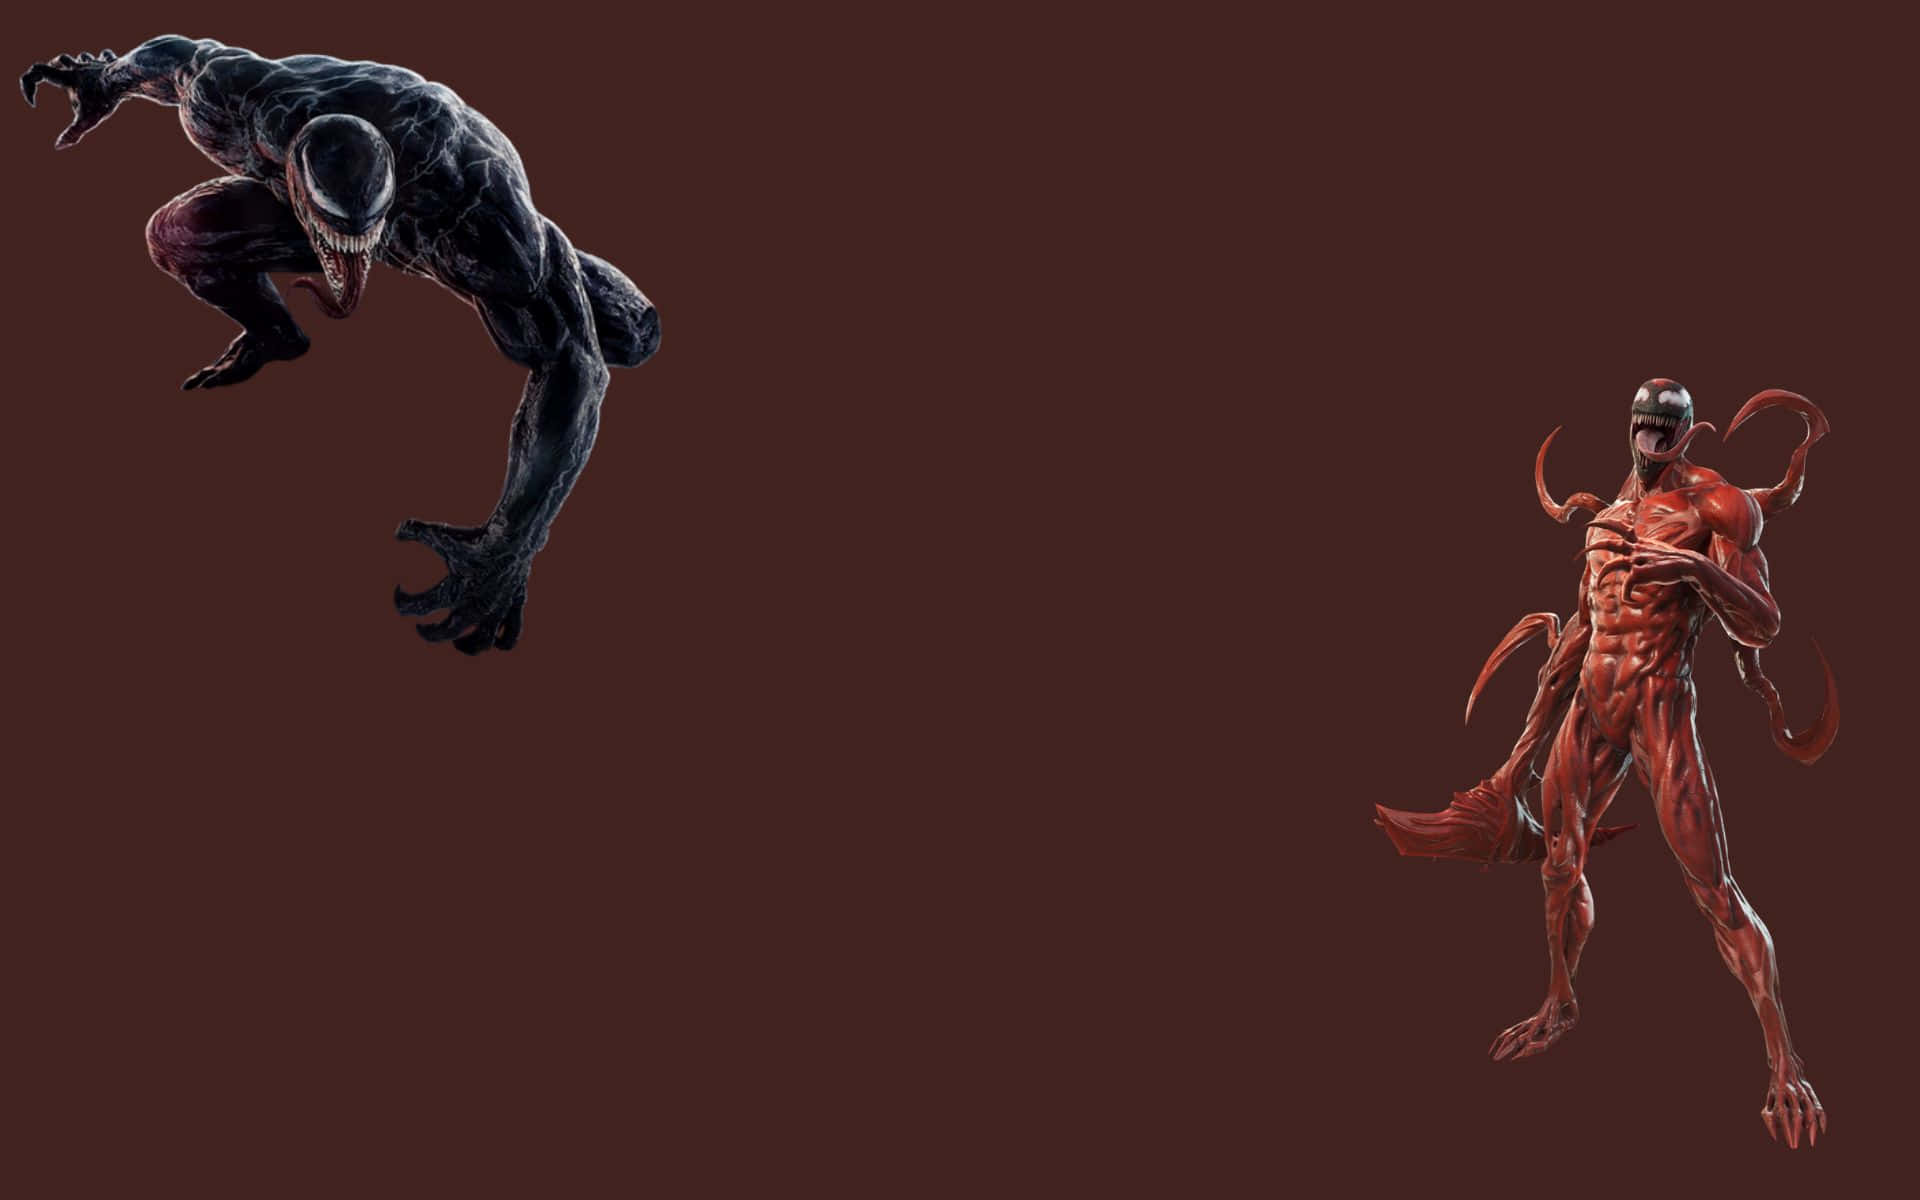 Carnage and Venom Battle in an Epic Face-Off Wallpaper